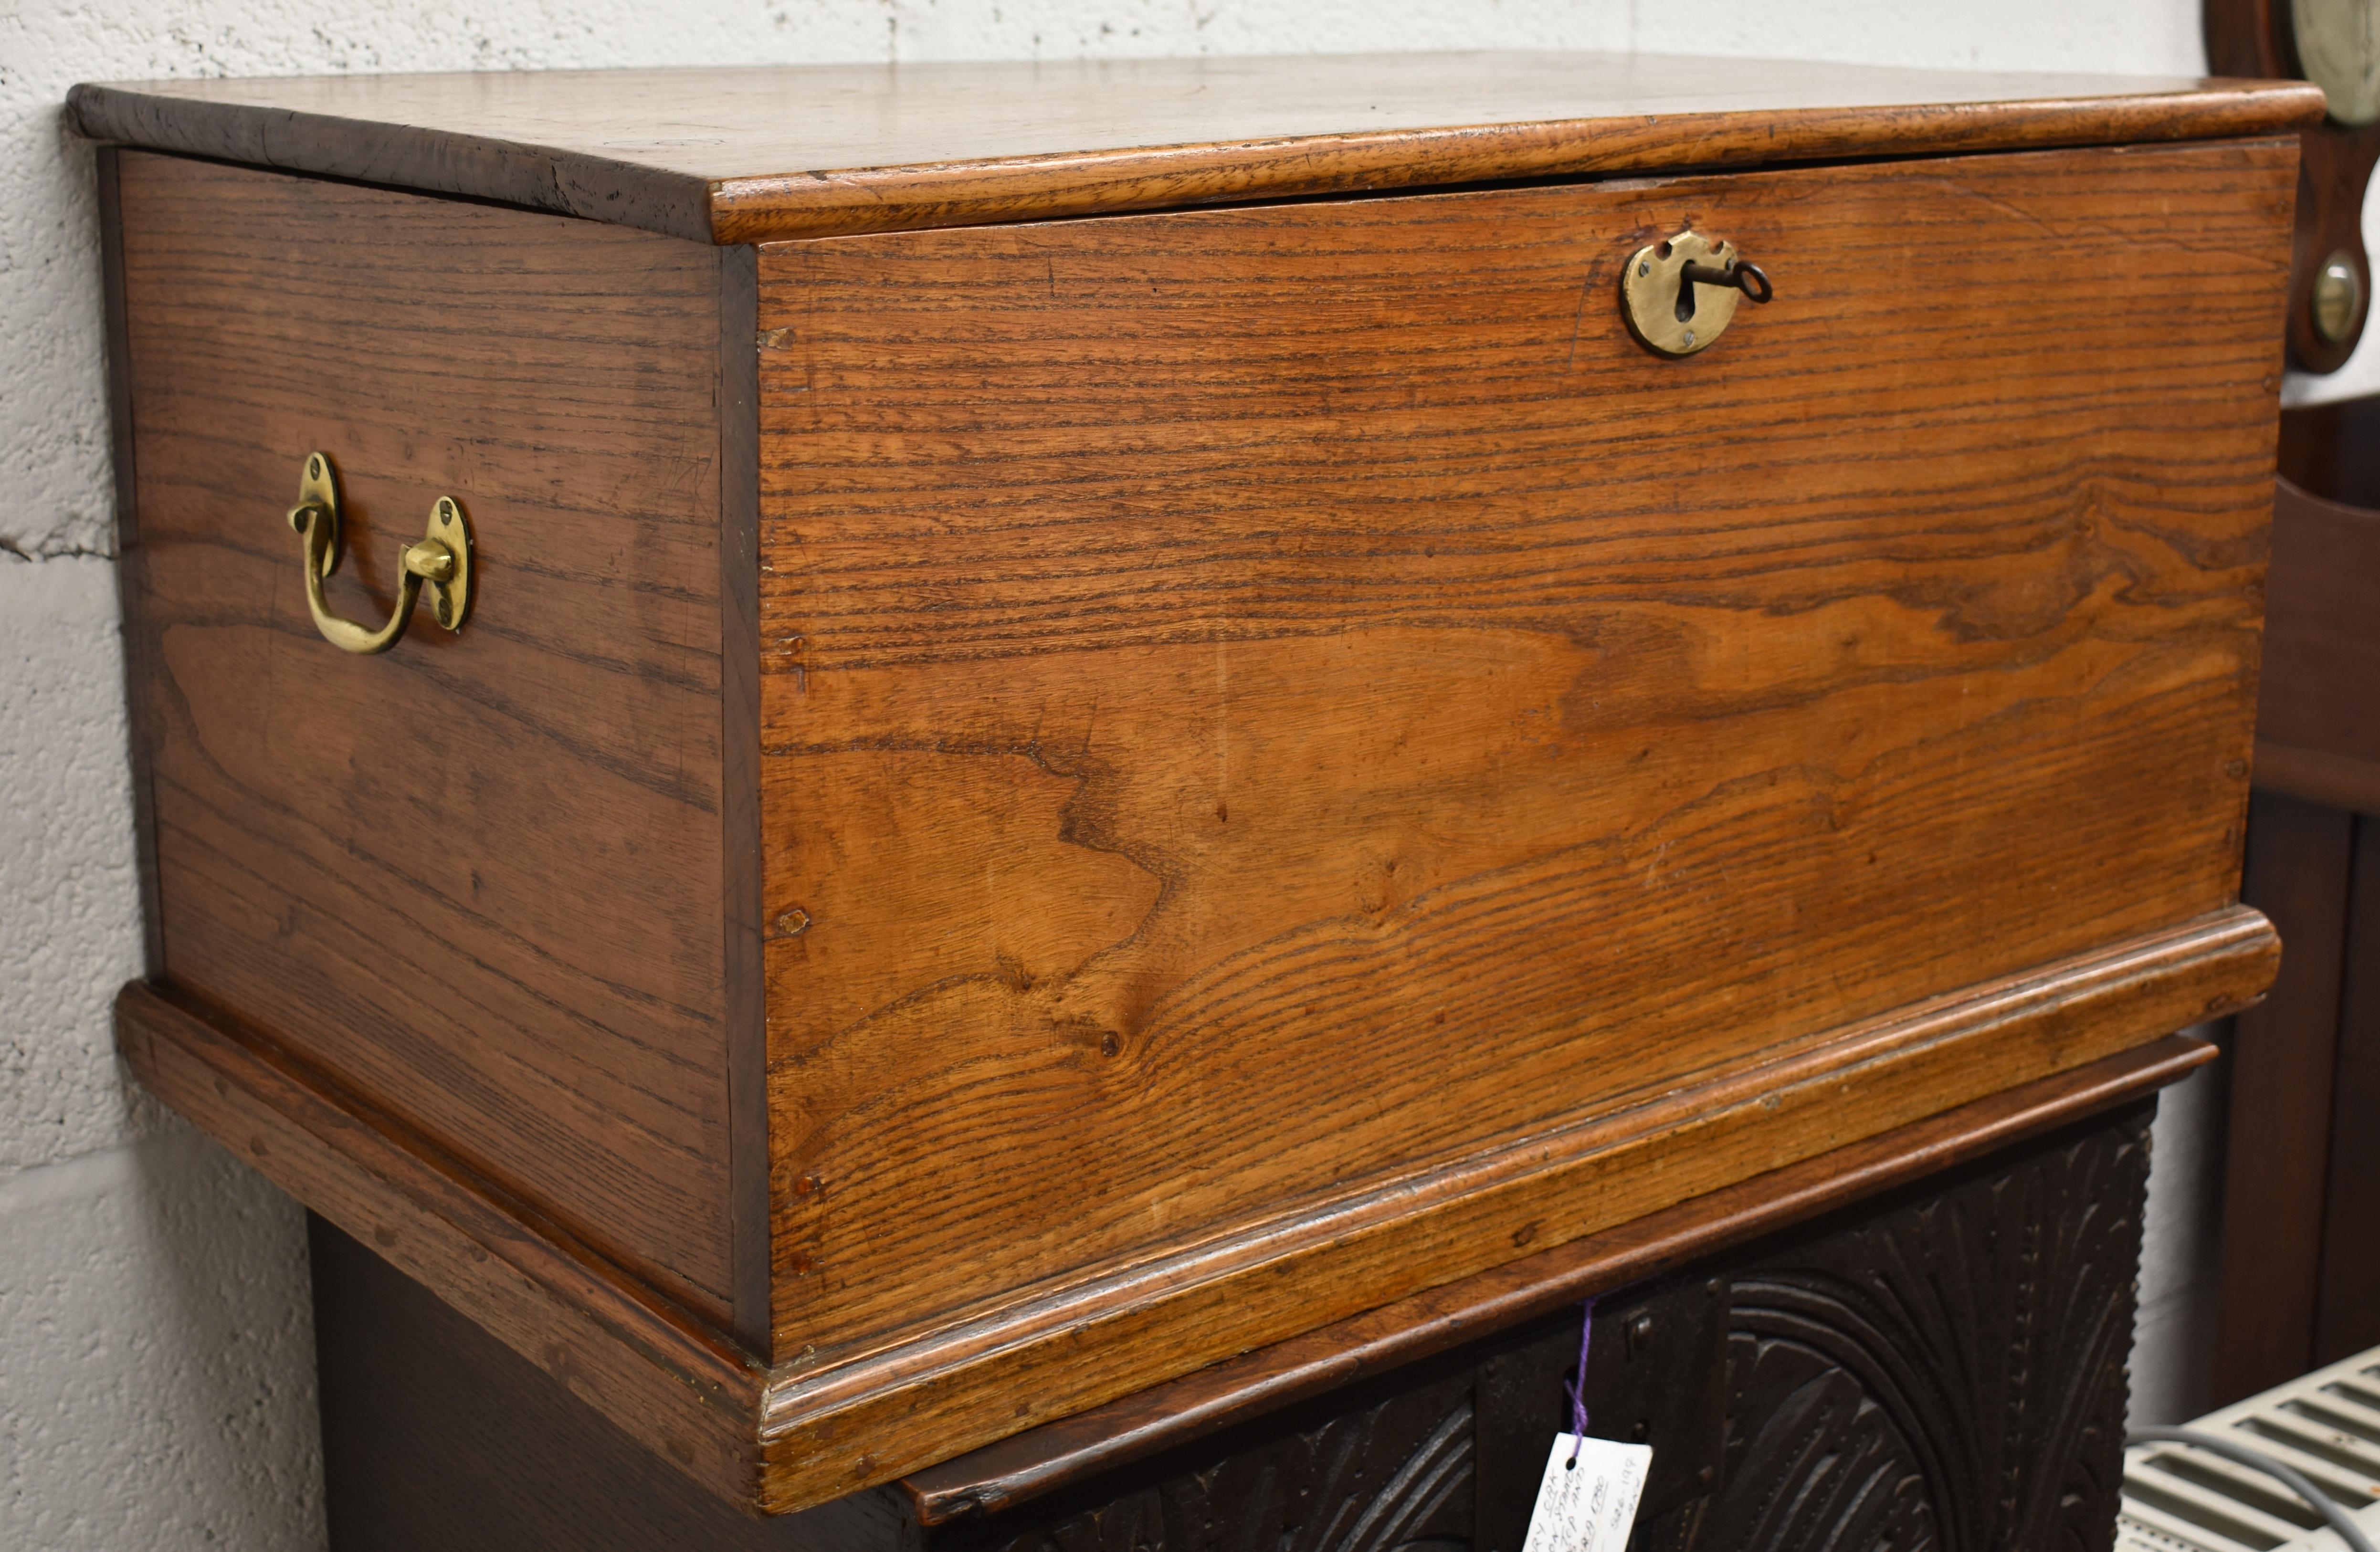 For sale is a good quality George III elm deed box, having a hinged lid opening to ample storage space. The side of the box has brass carrying handles and is complete with its original lock. This piece is in good condition for its age having been